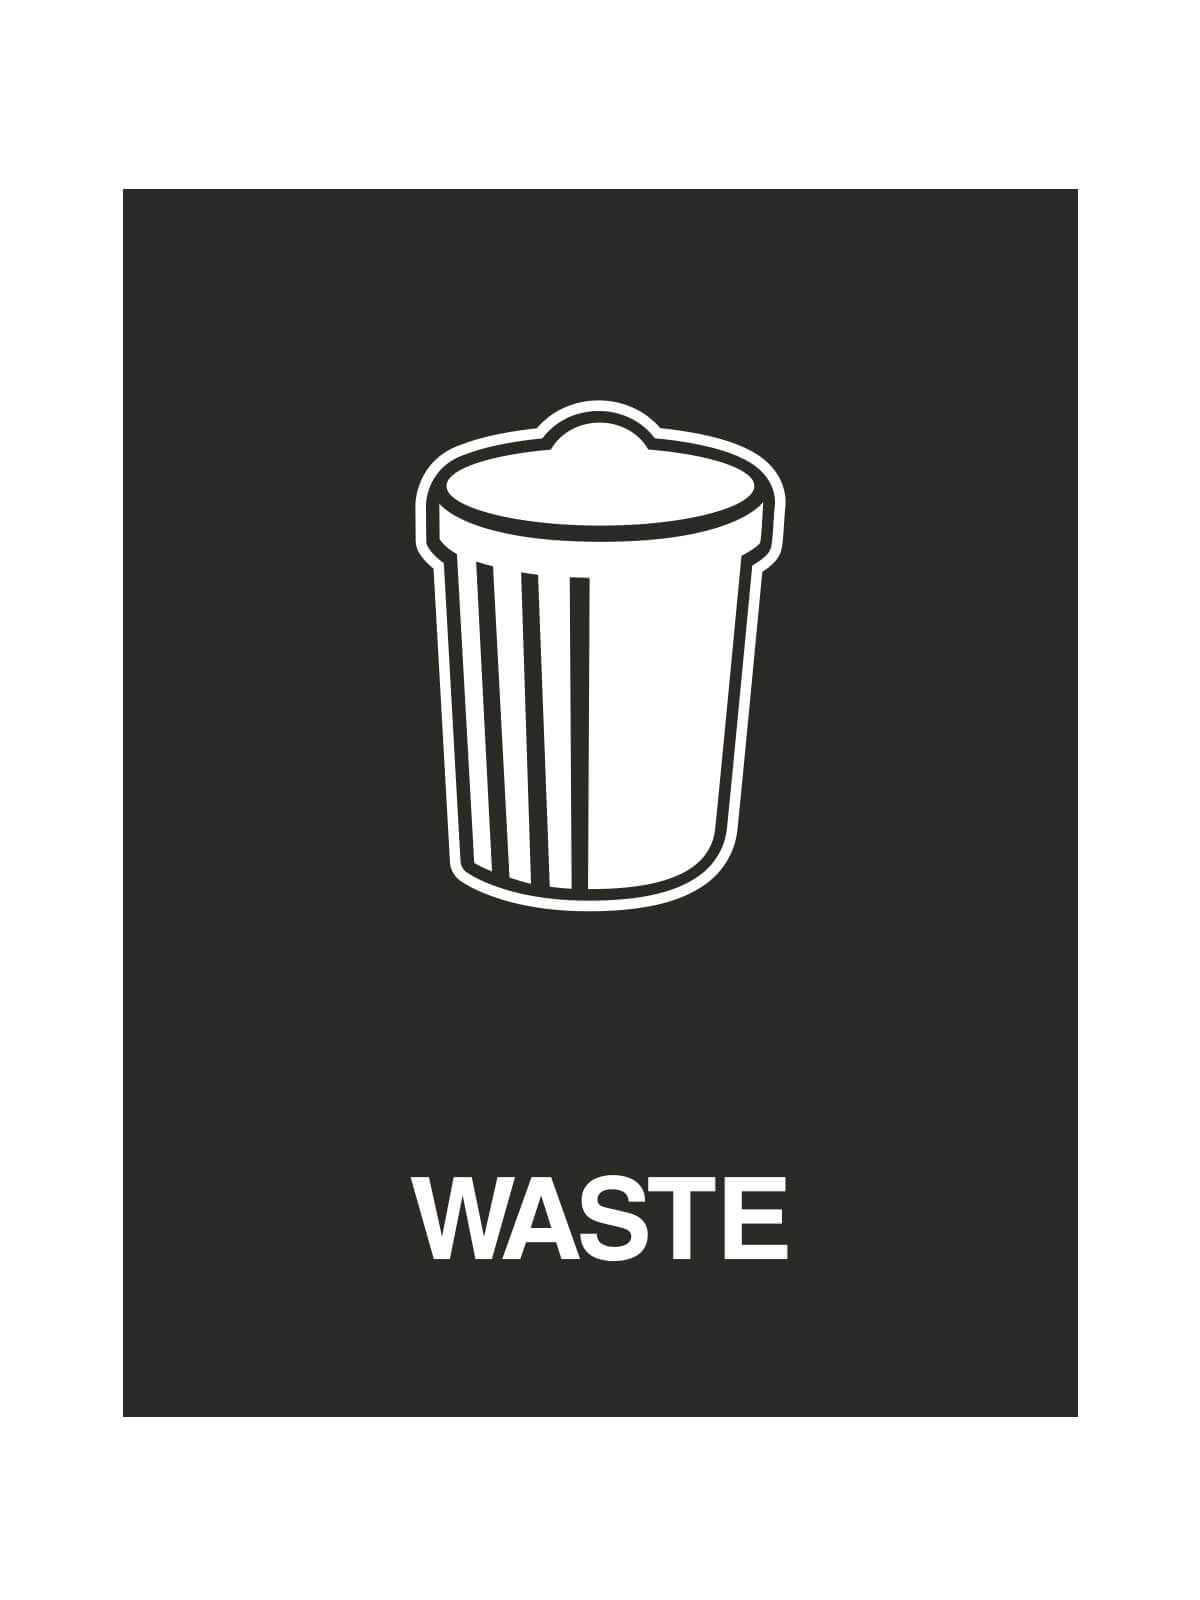 Illustration of trash can in white against black background.